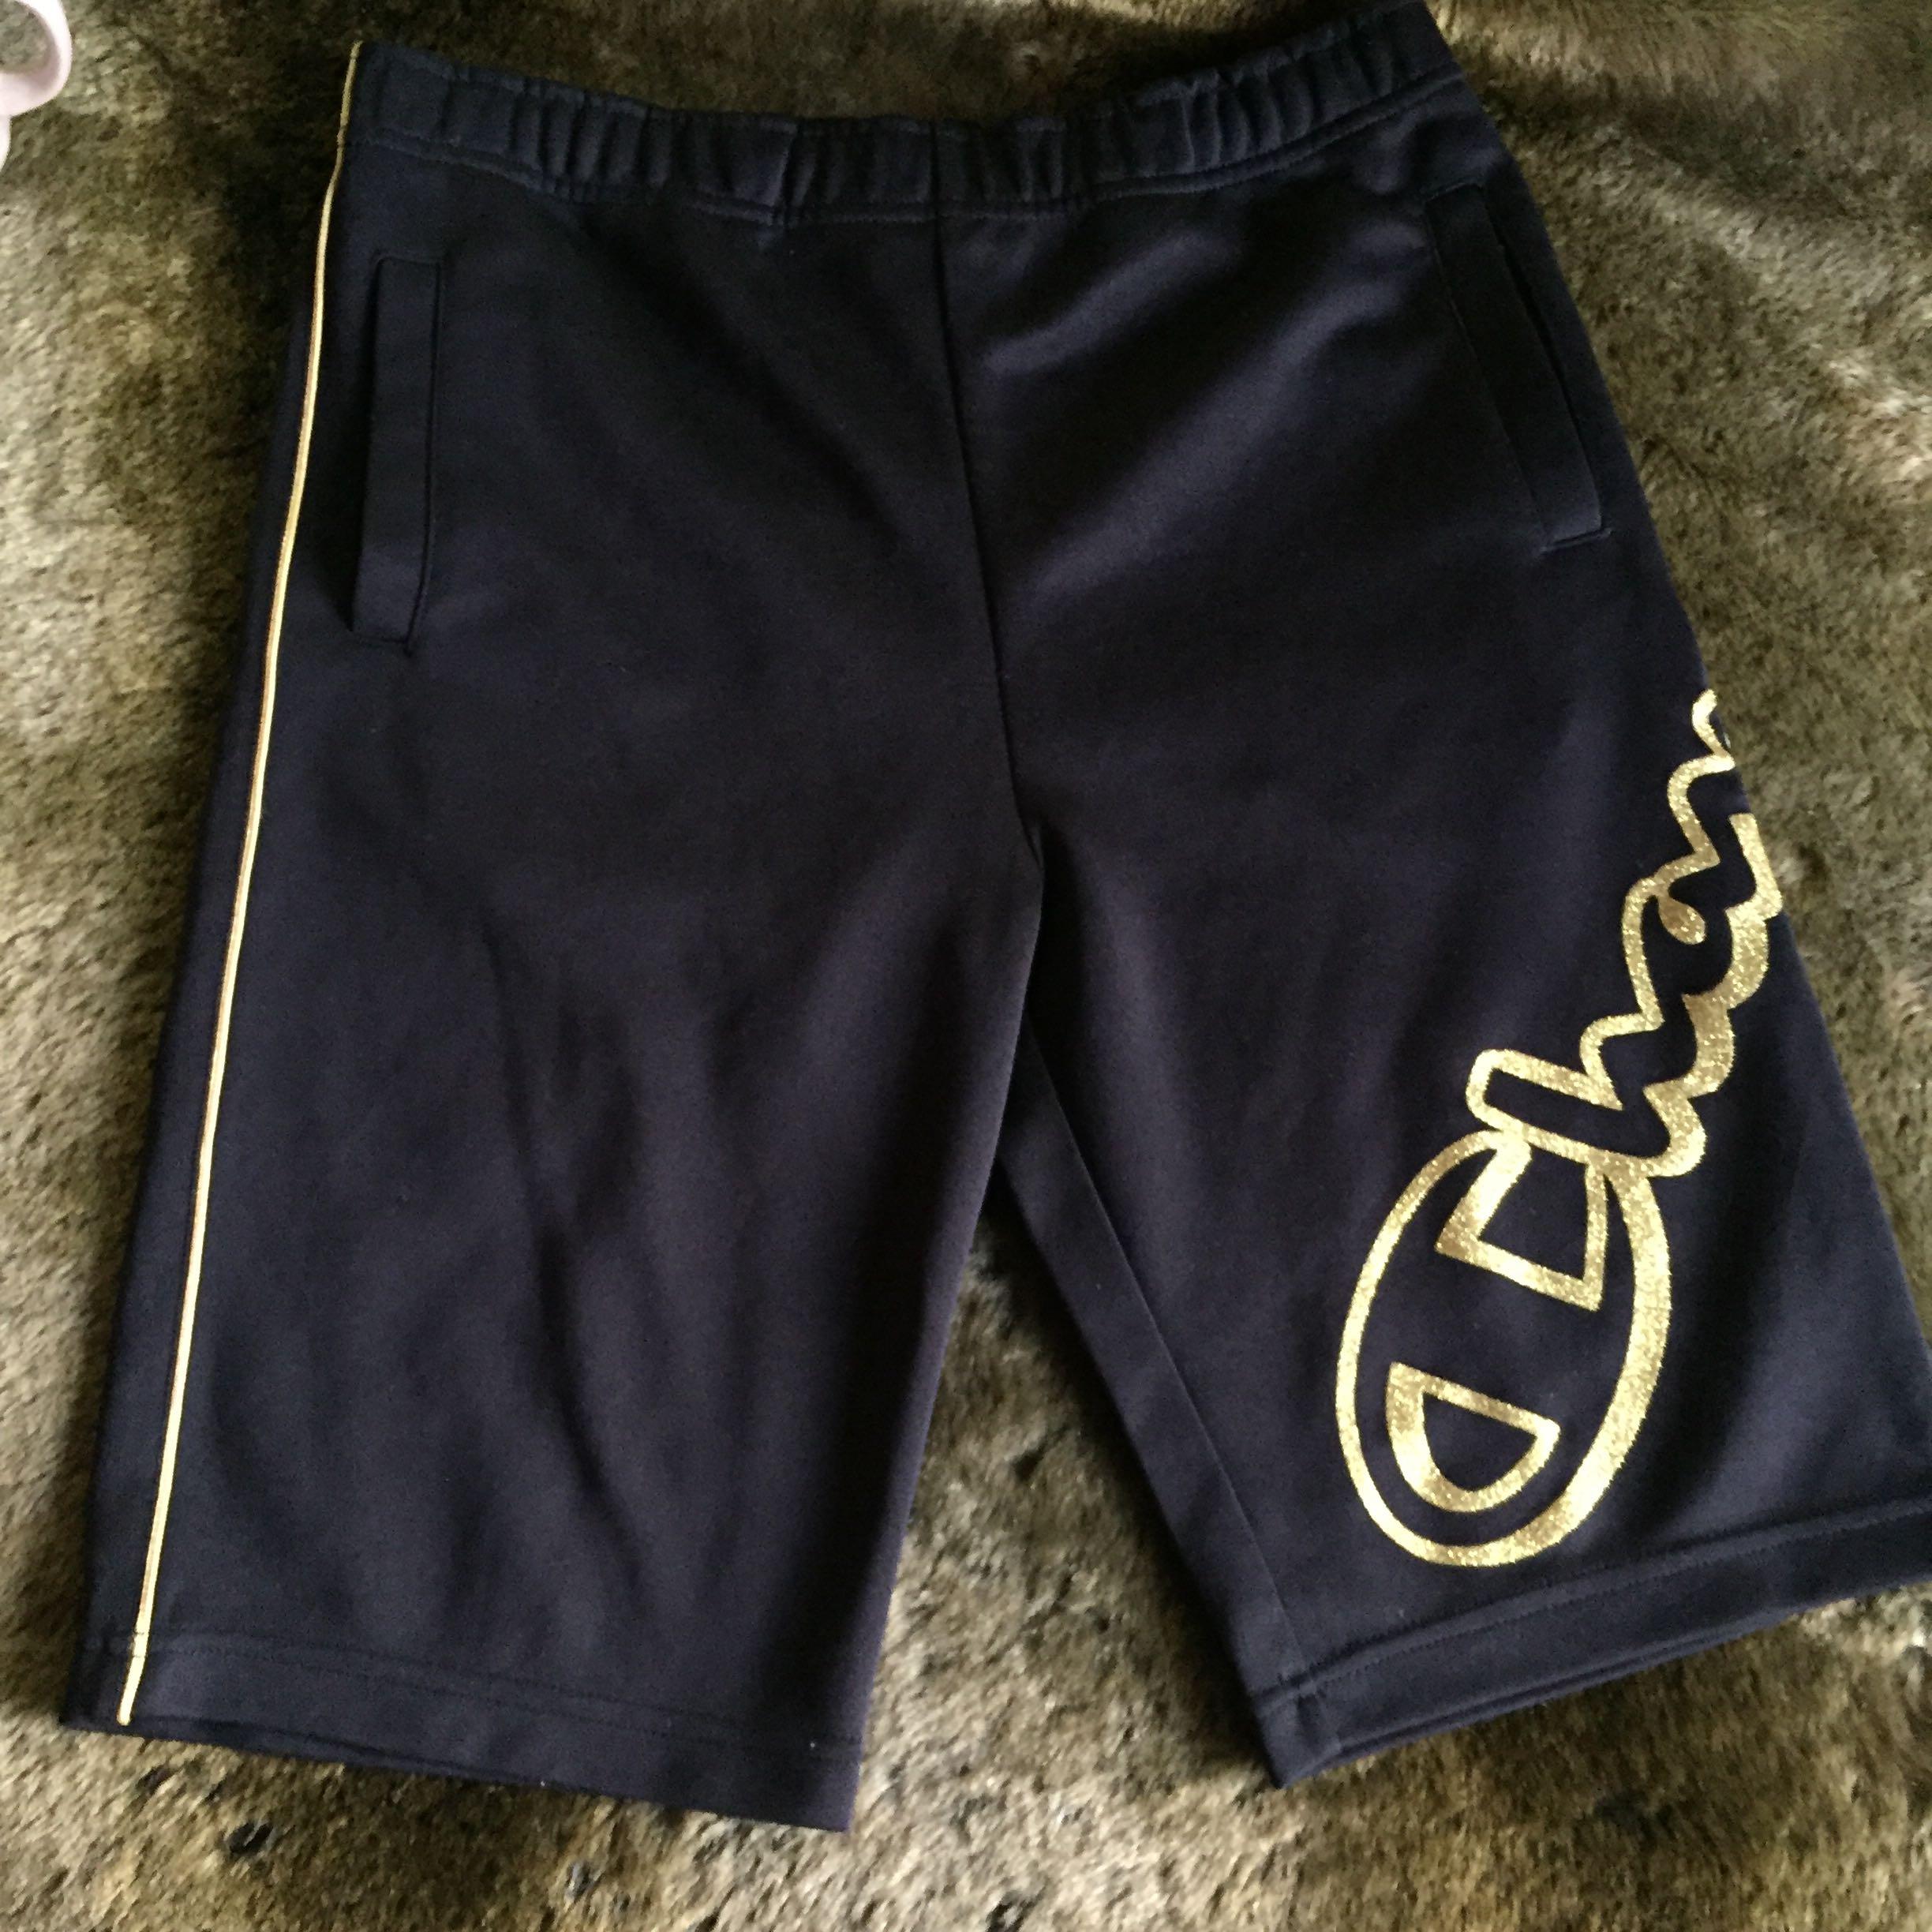 champion shorts with liner